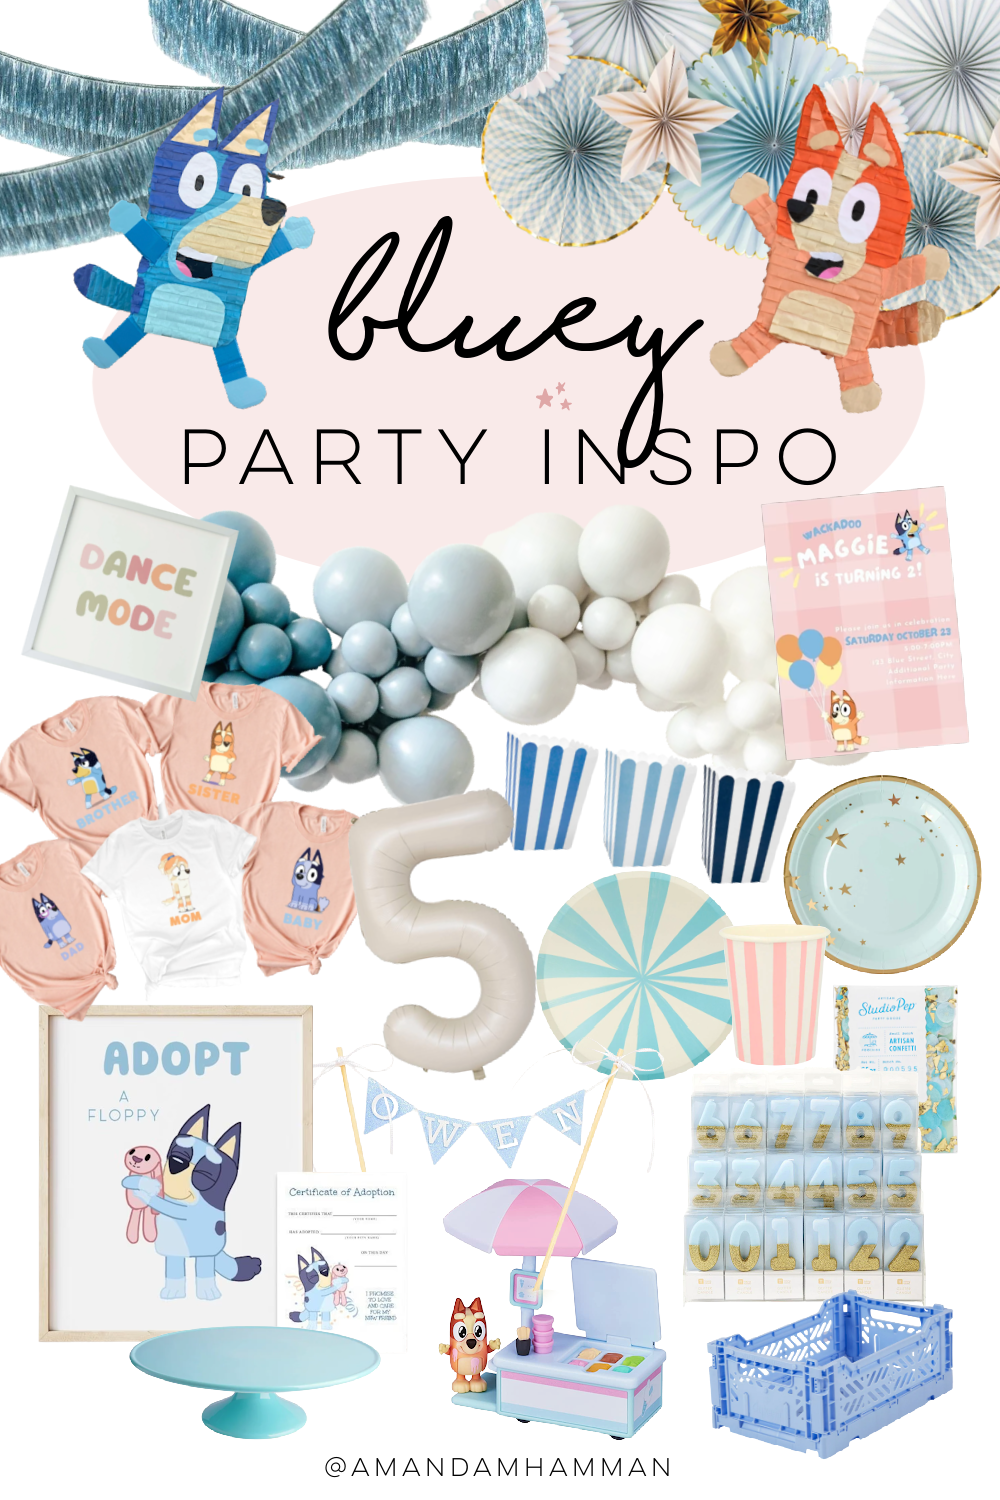 Bluey Birthday Party Inspiration - amanda hamman - inspiration for your  home, holidays, & parties!